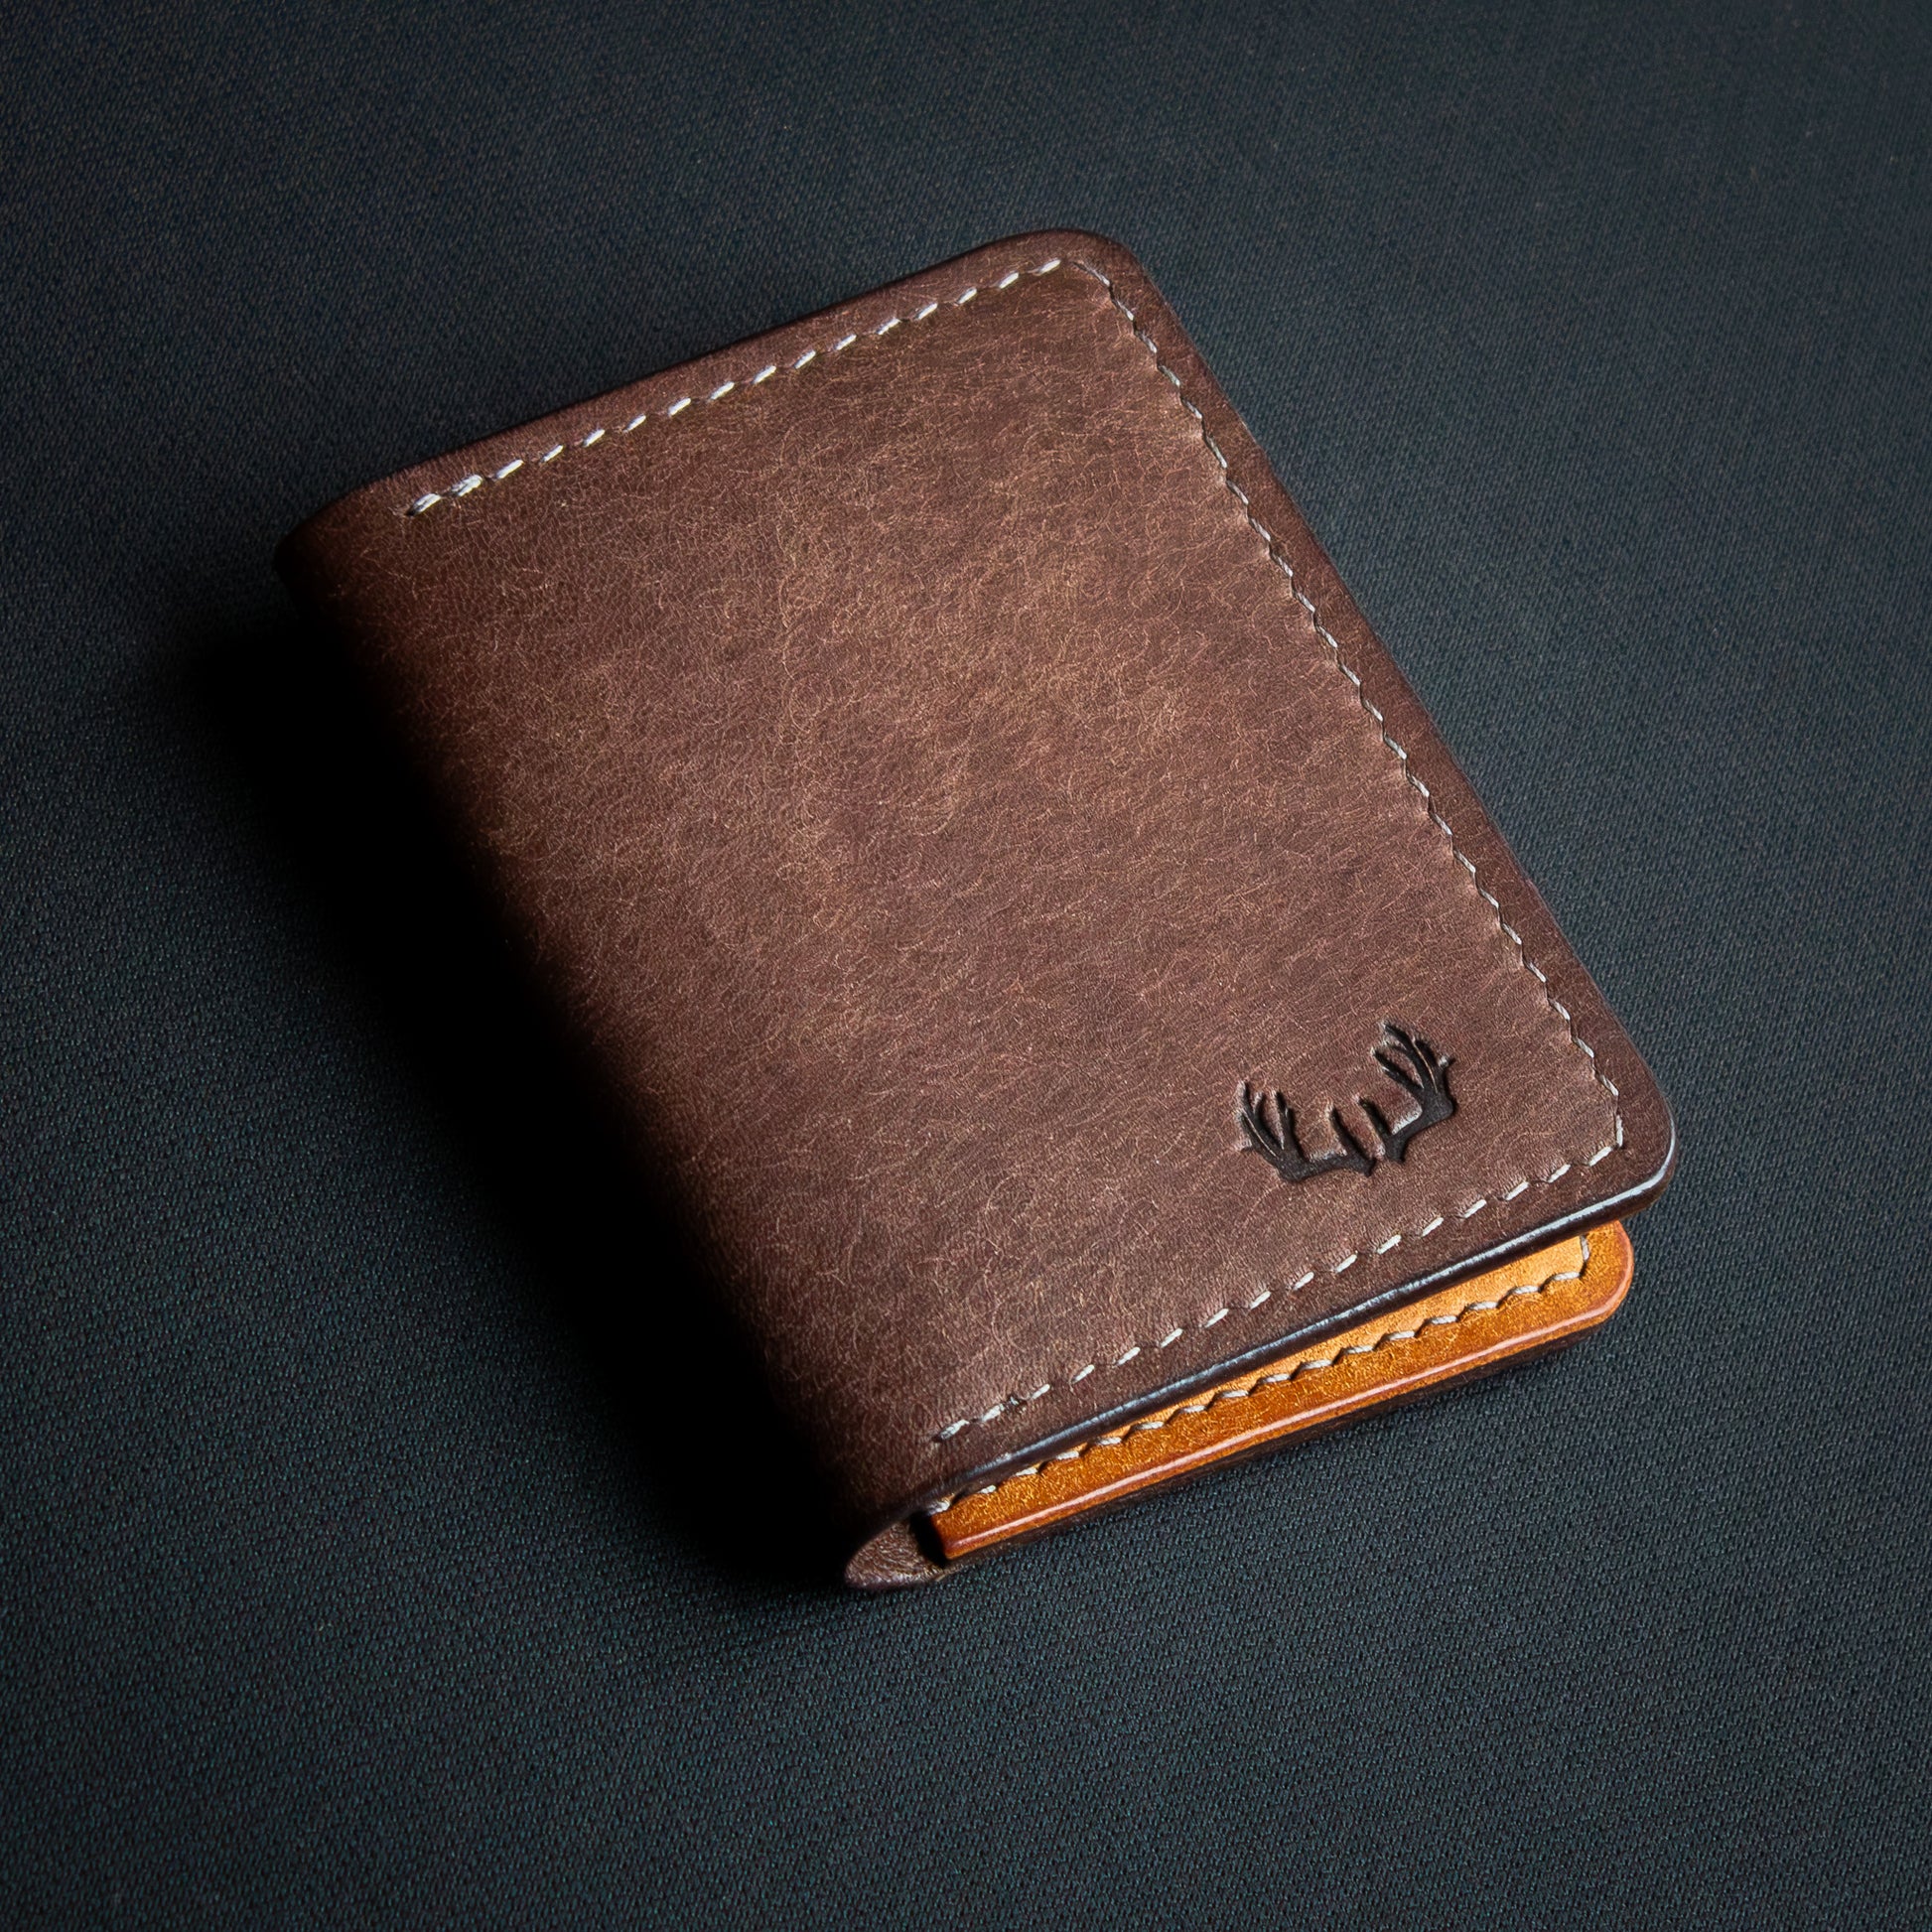 handcrafted brown leather wallet ontop of black background - open leather cardholder - Badalassi Carlo Pueblo Cognac and Castagno leather - closed with brown elkwood leather stamp